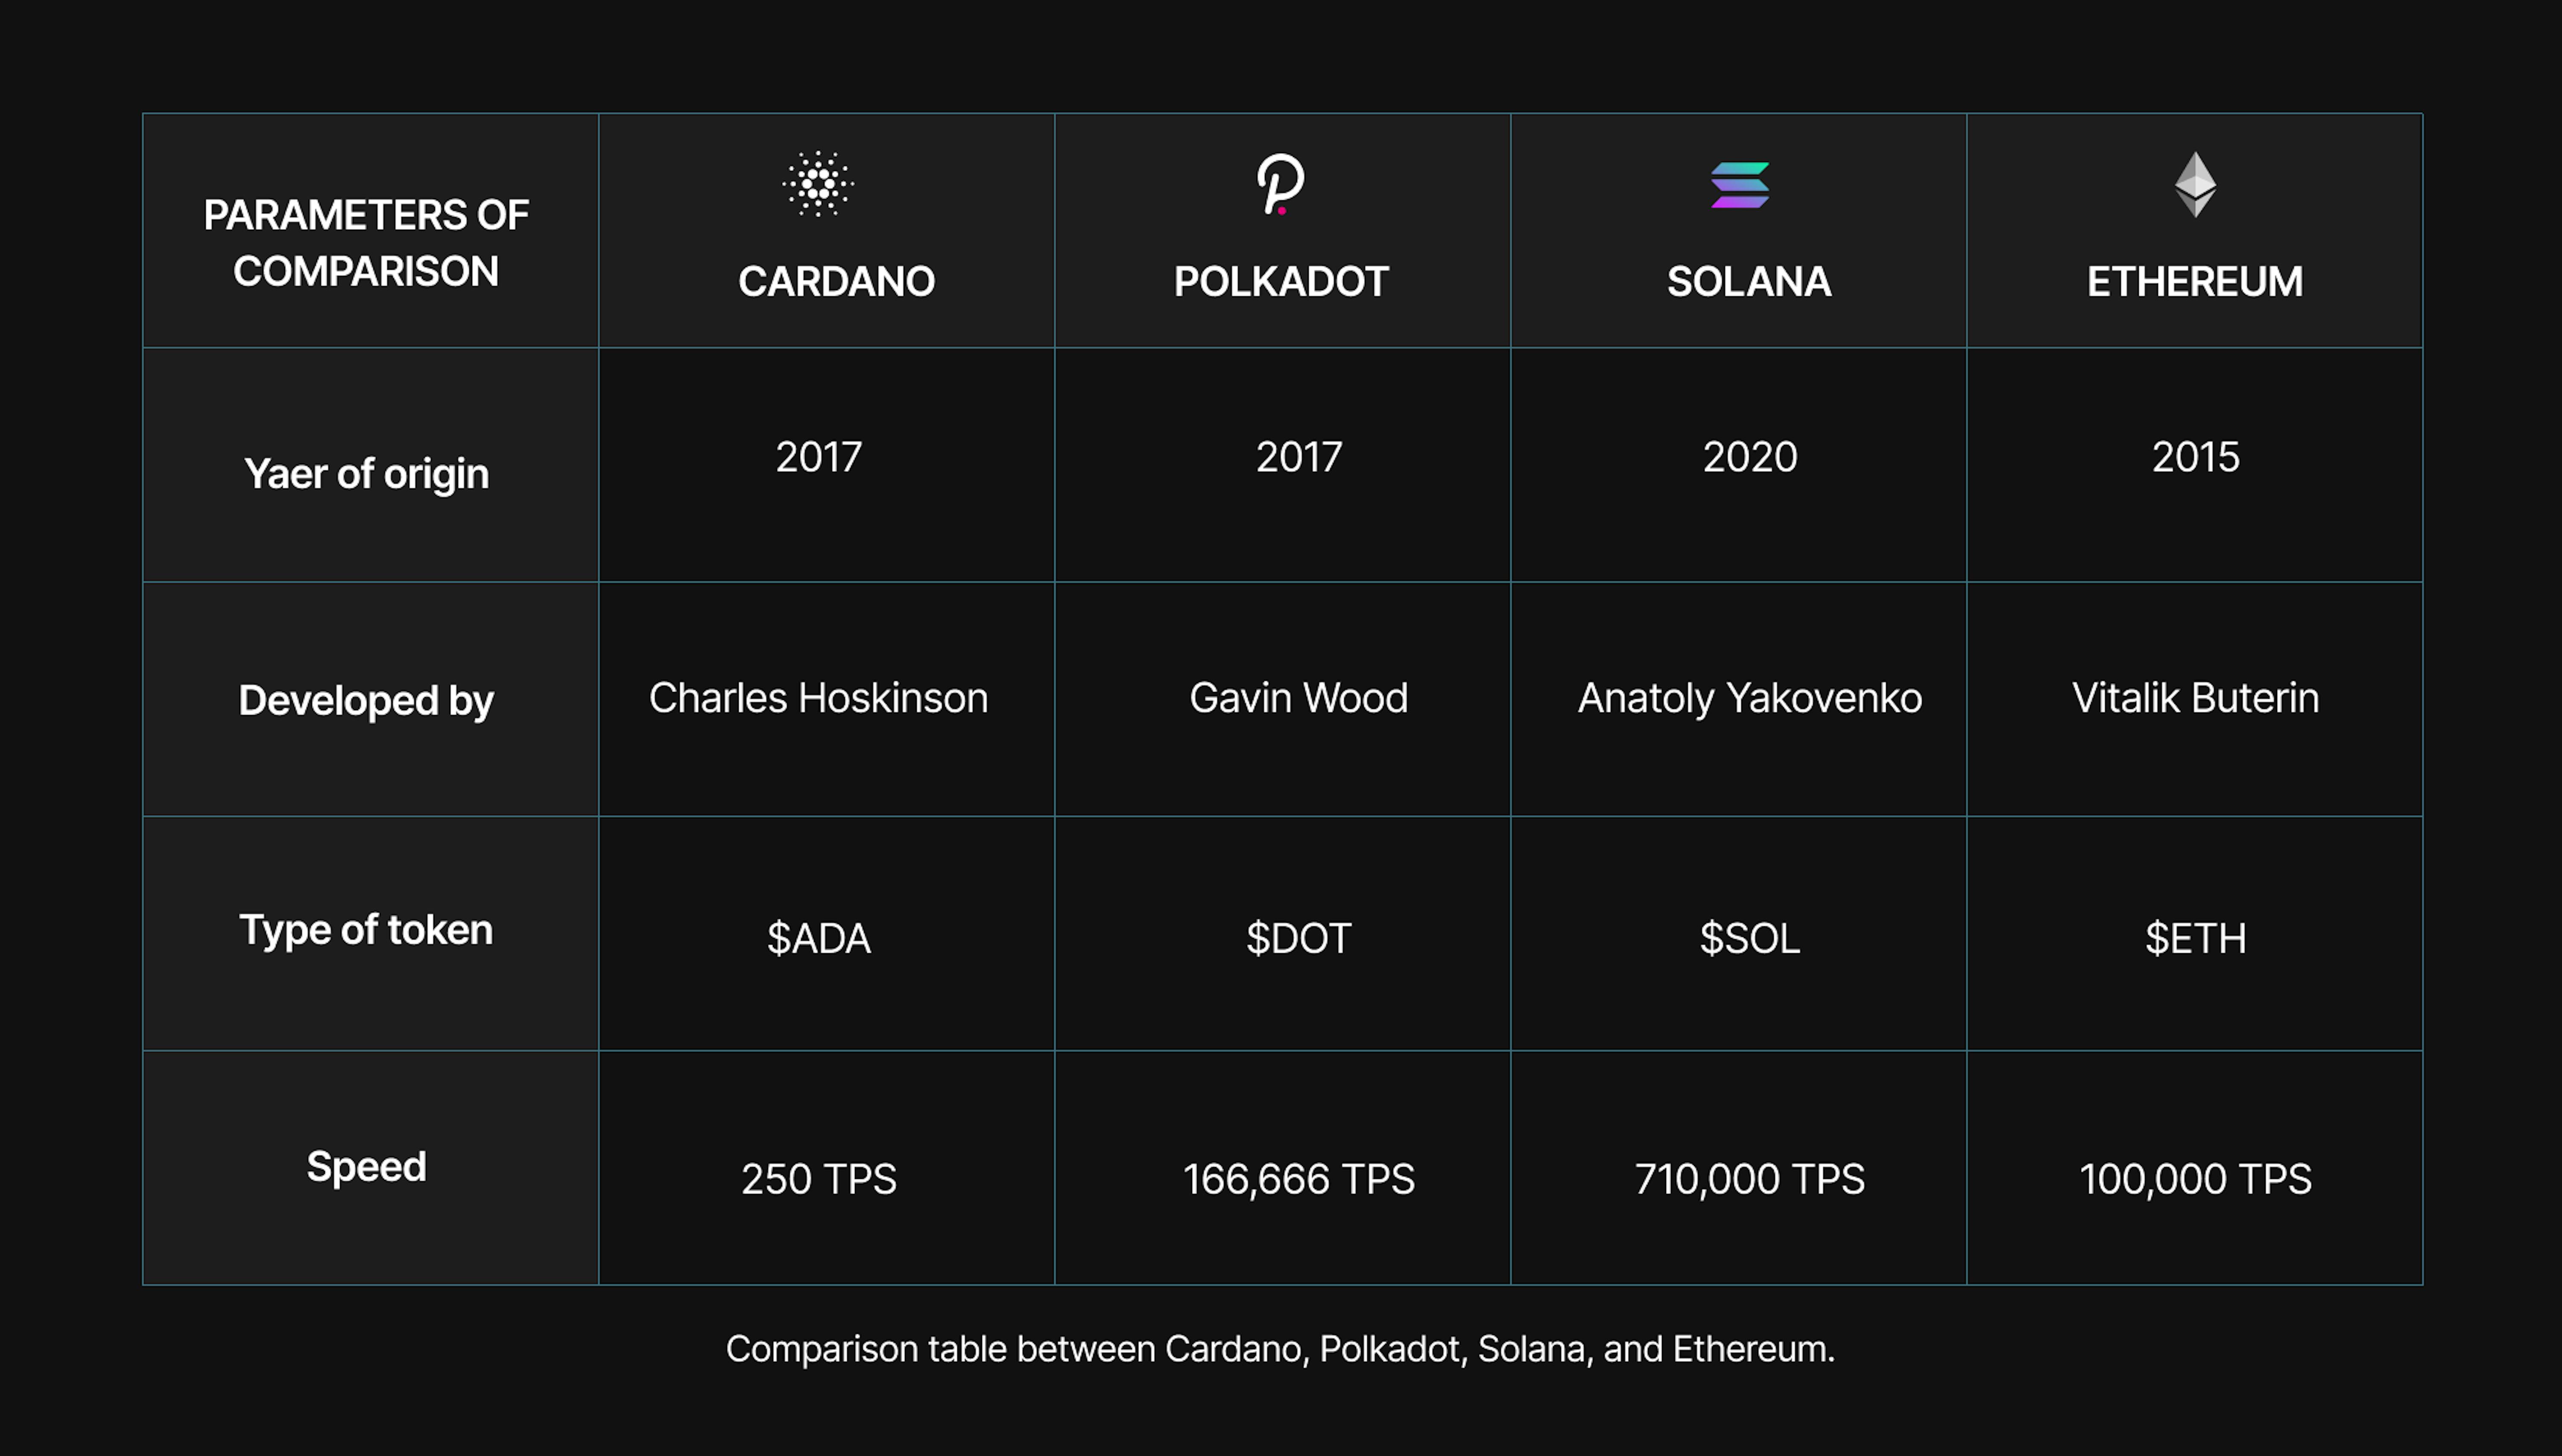 Comparison table between Cardano, Polkadot, Solana, and Ethereum.